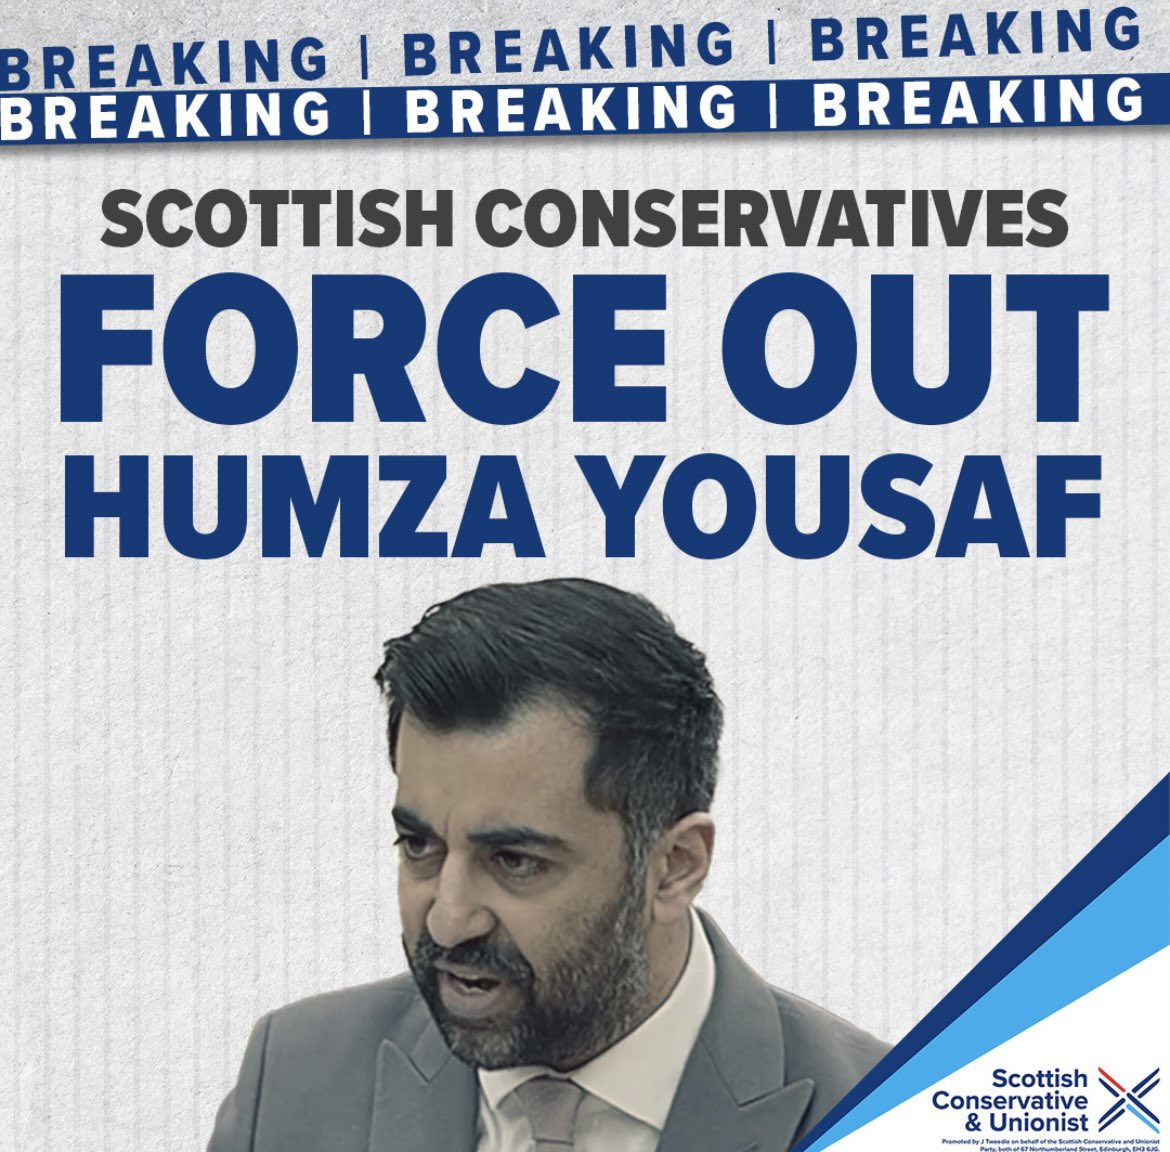 The Scottish Conservatives have forced Humza Yousaf out of office. Our Vote of No Confidence has got the SNP leader out of Bute House.